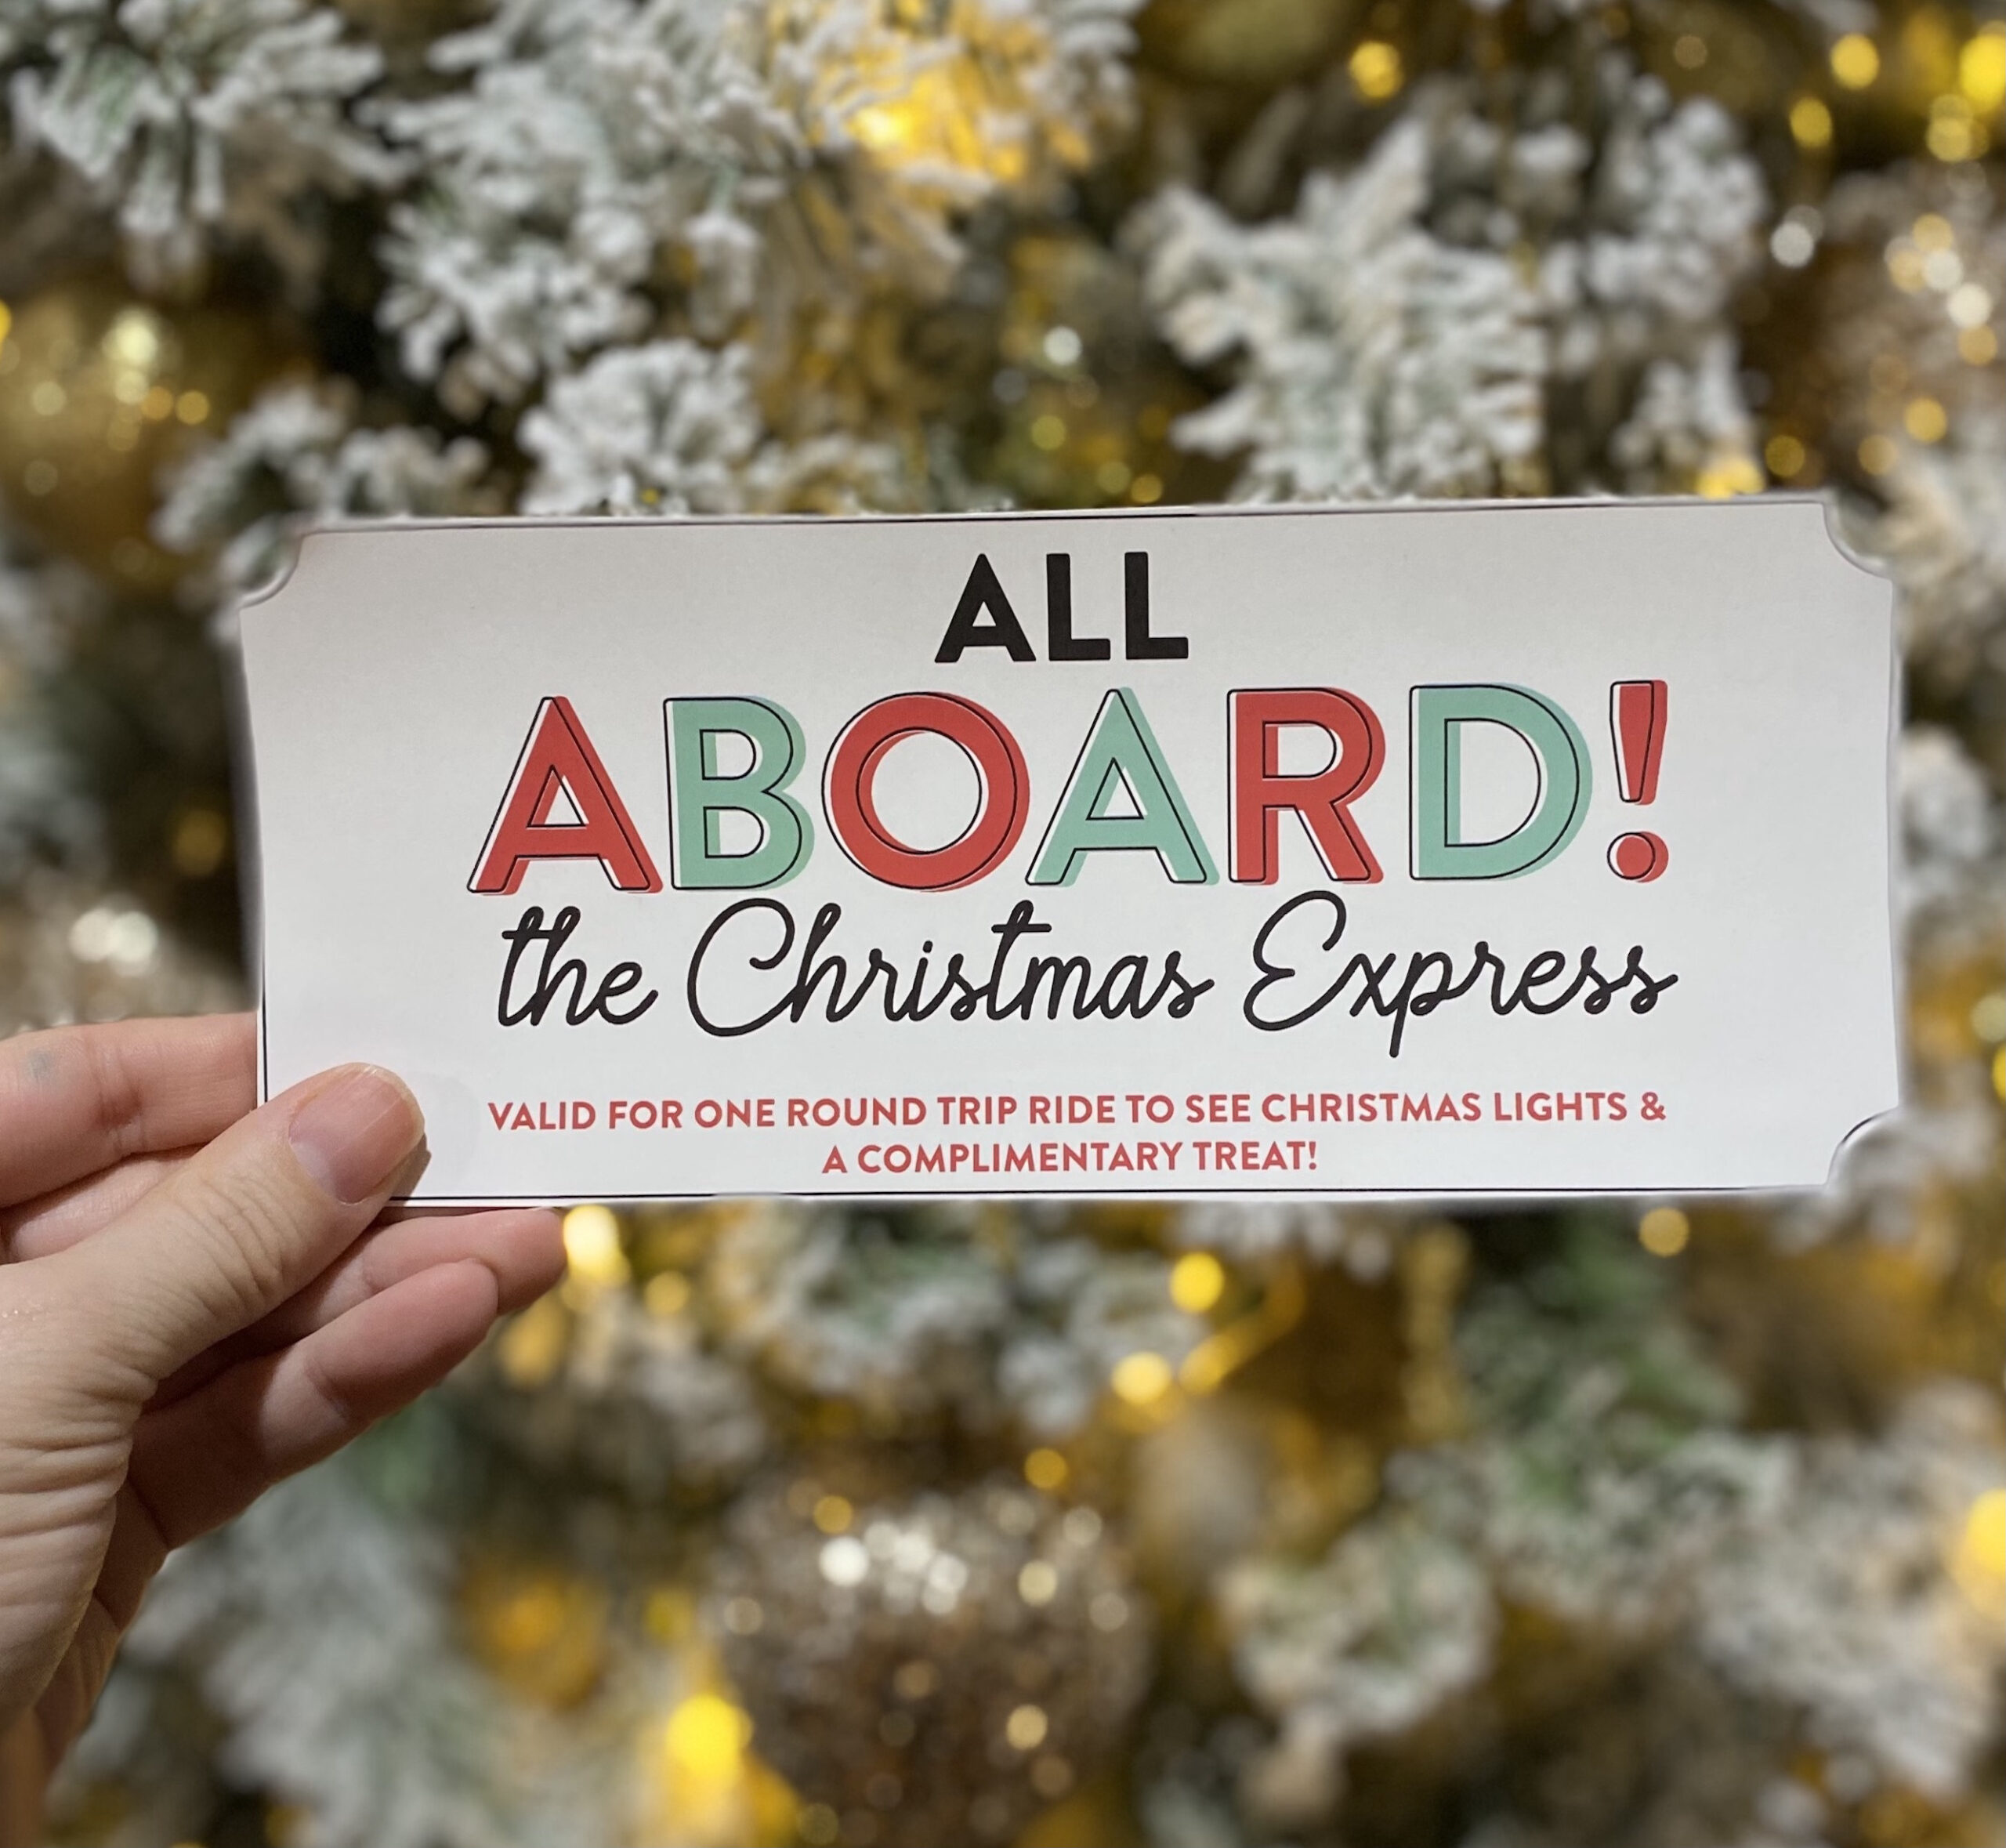 Our Christmas Express Ticket in front of tree